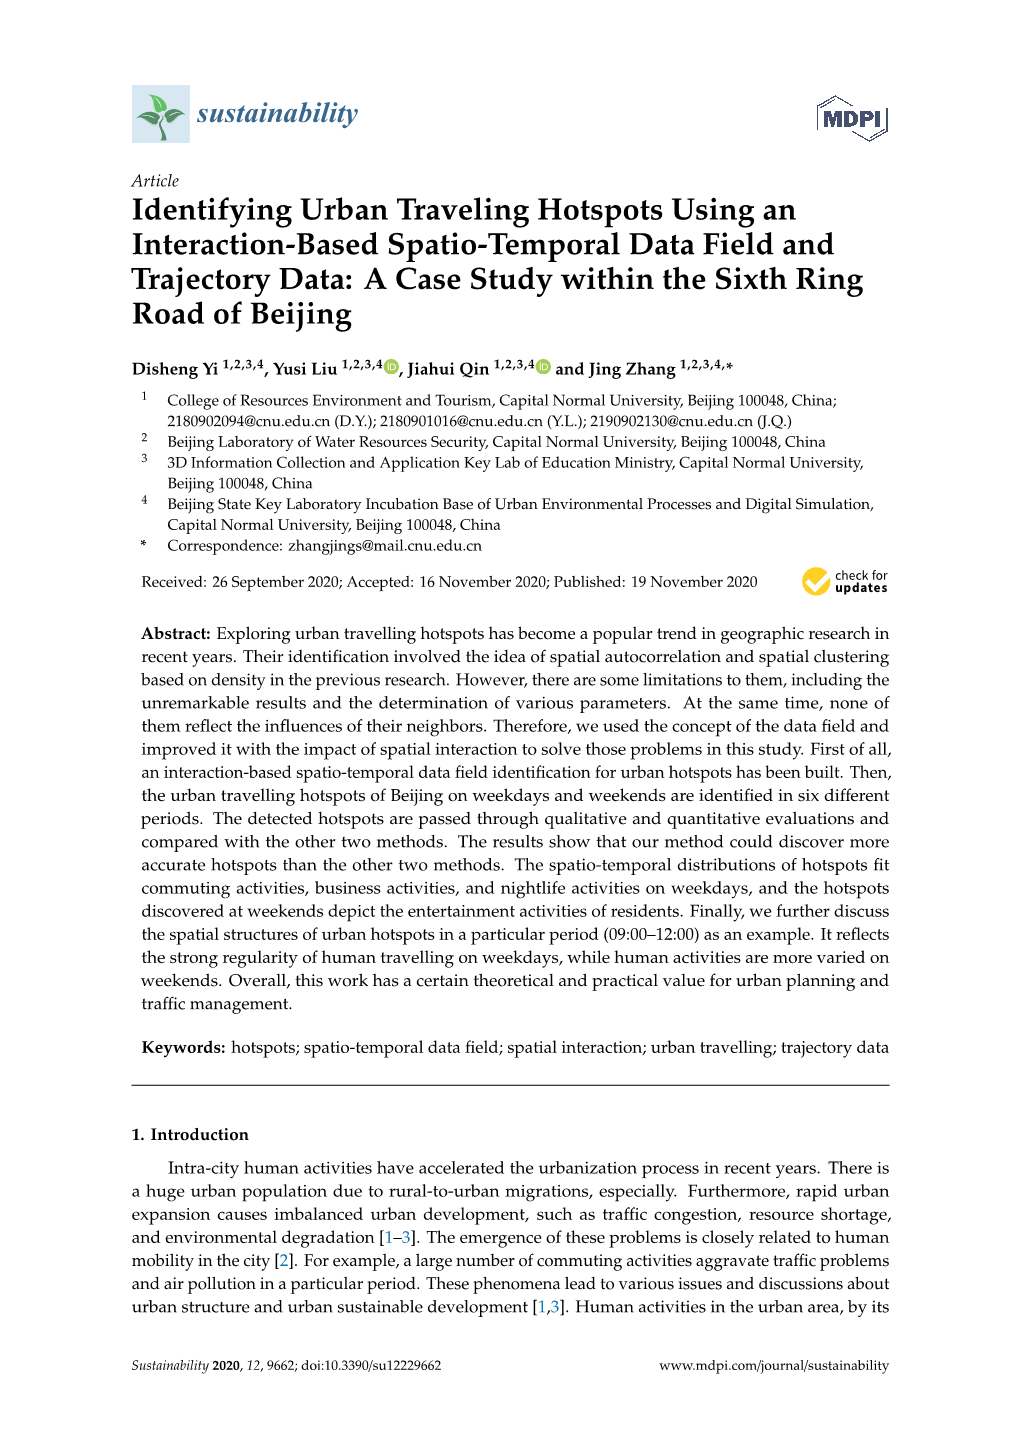 Identifying Urban Traveling Hotspots Using an Interaction-Based Spatio-Temporal Data Field and Trajectory Data: a Case Study Within the Sixth Ring Road of Beijing